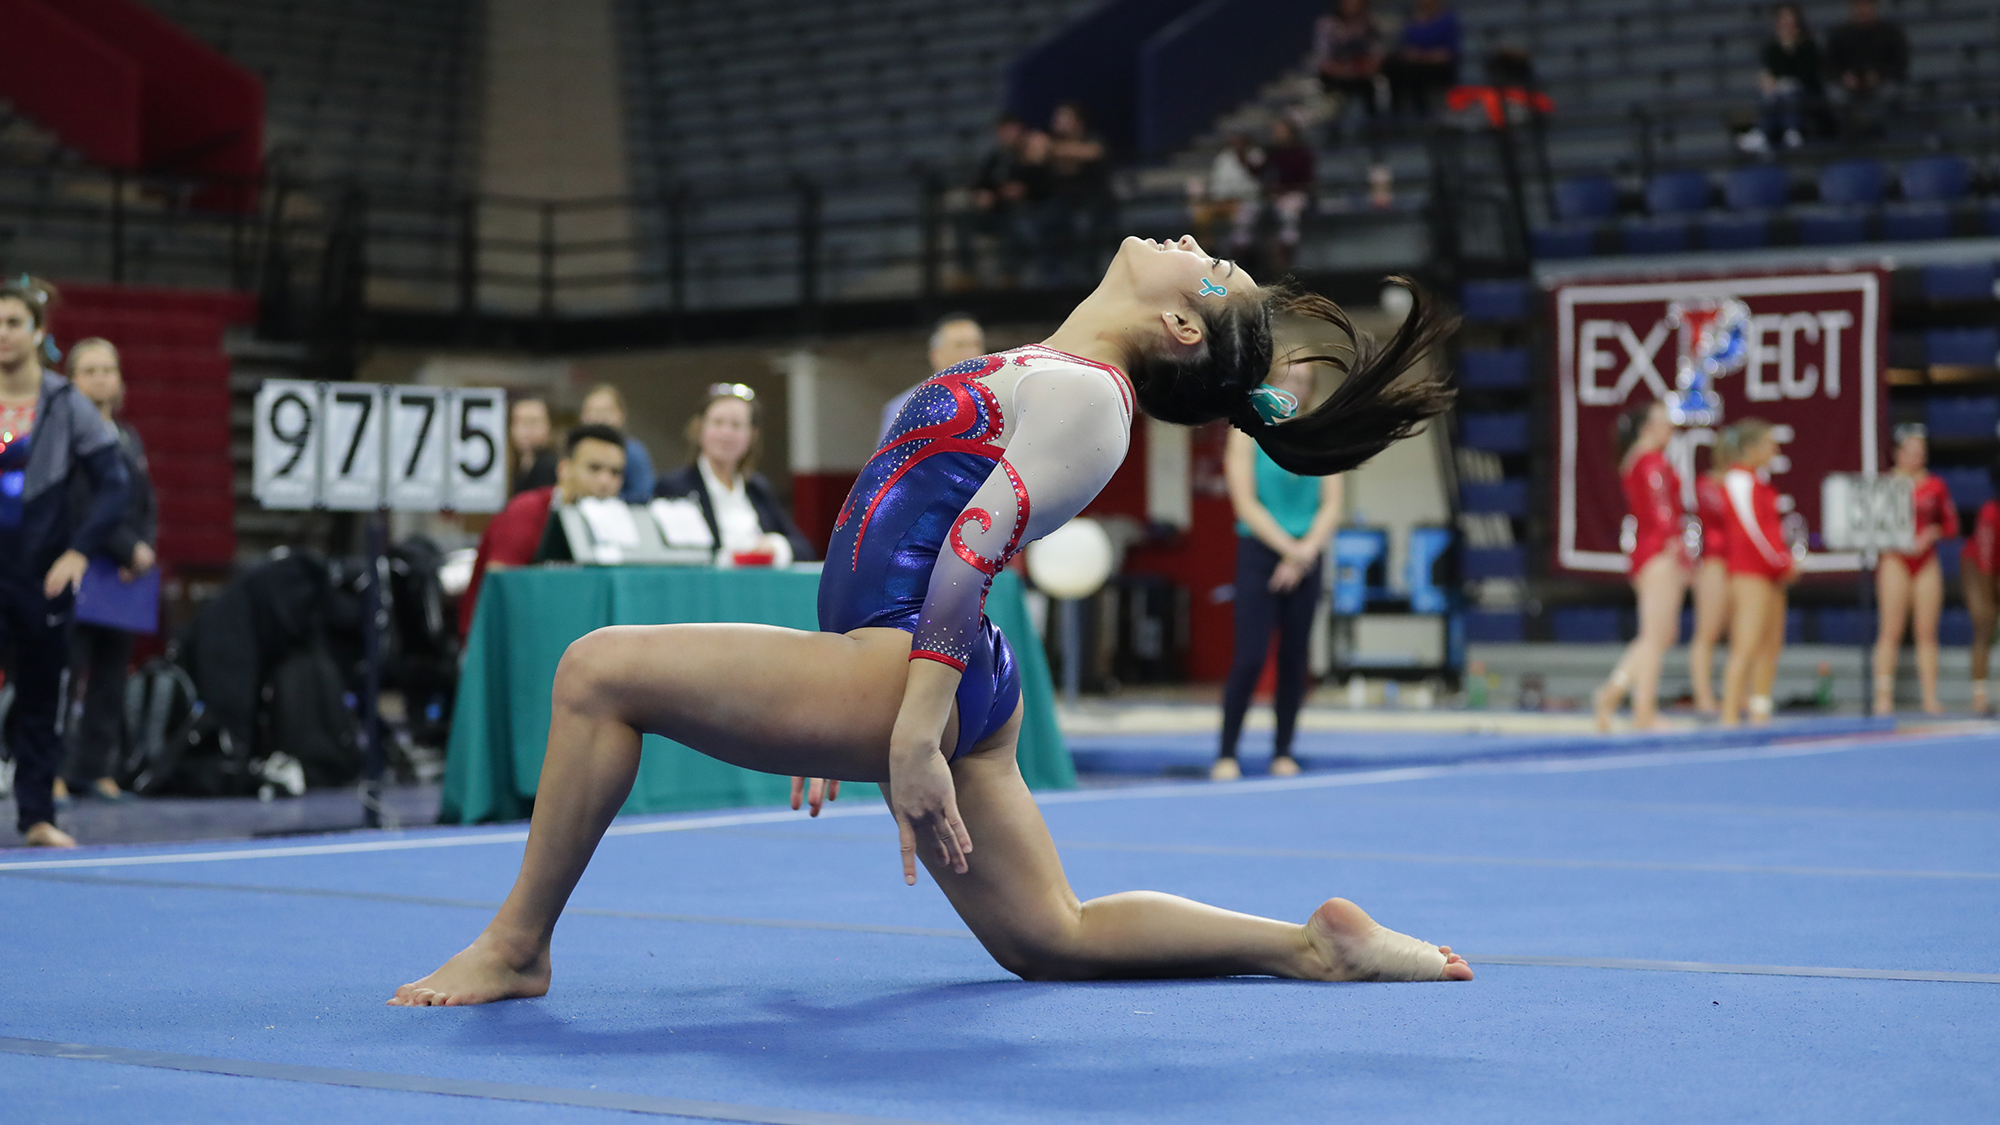 Sydney Kraez poses on the mat during her floor routine.